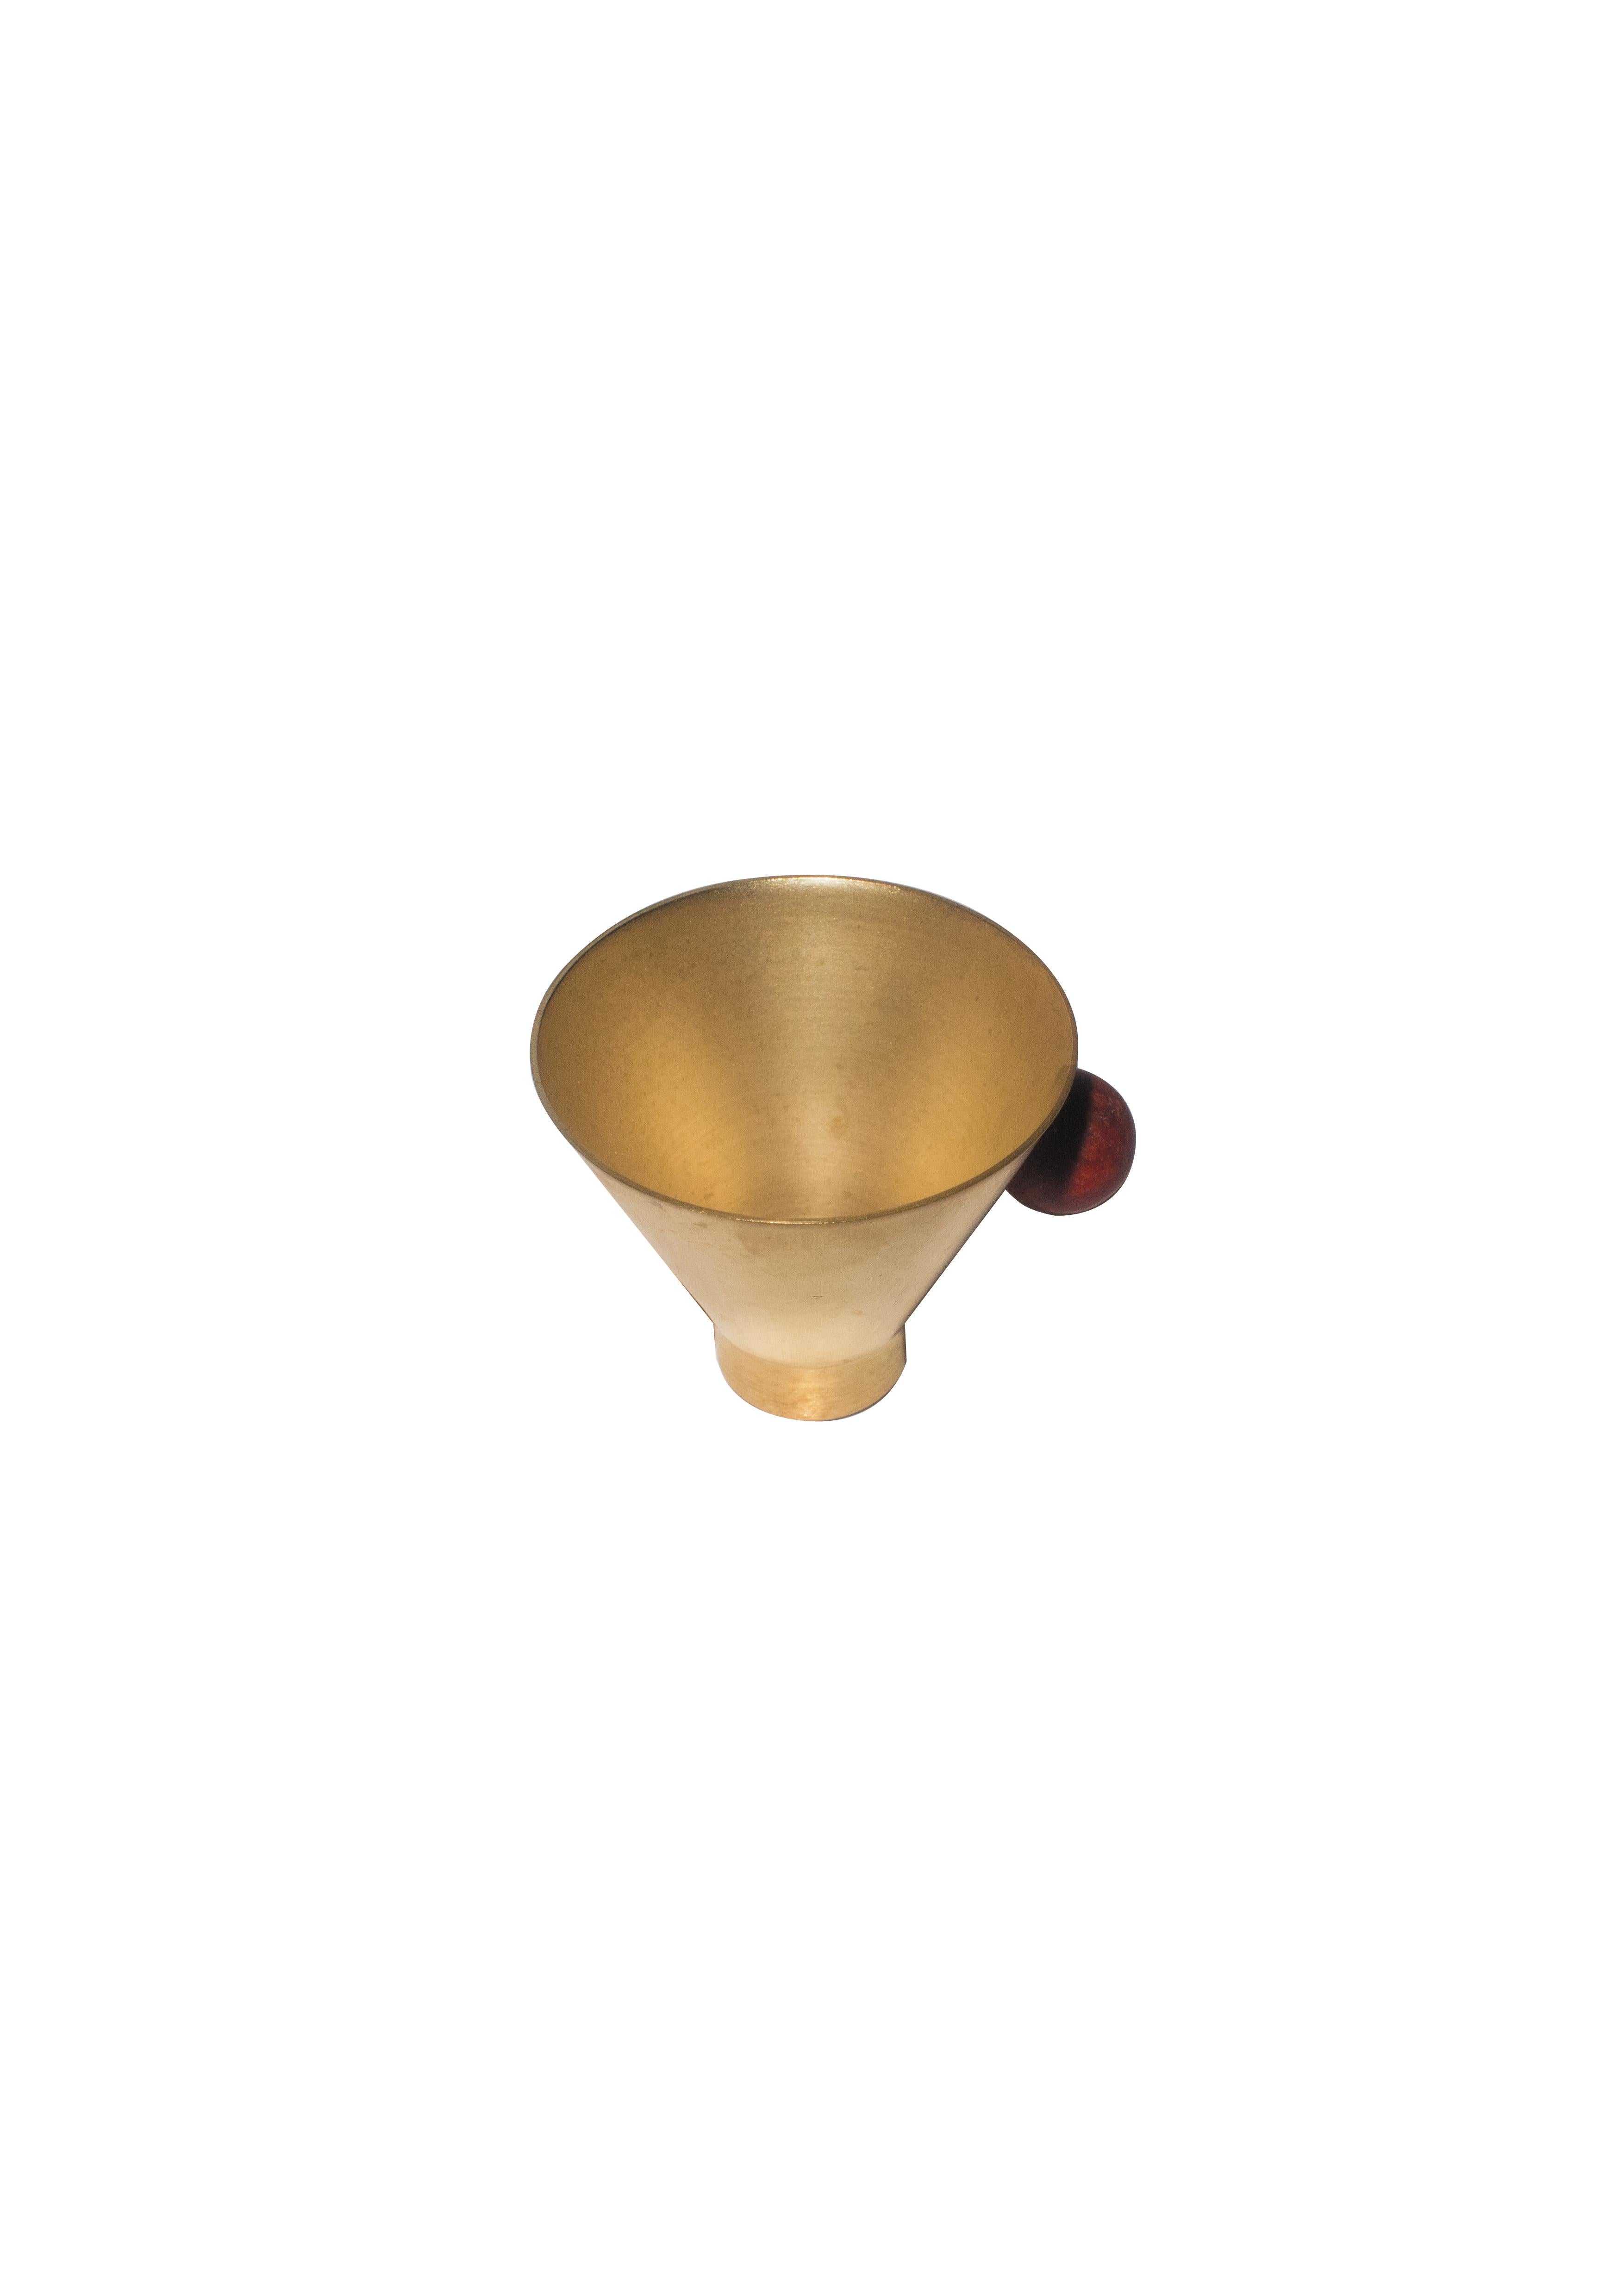 Contemporary Gold Plated Red Stone Cone Cup Handcrafted Italy by Natalia Criado (Beschichtet) im Angebot